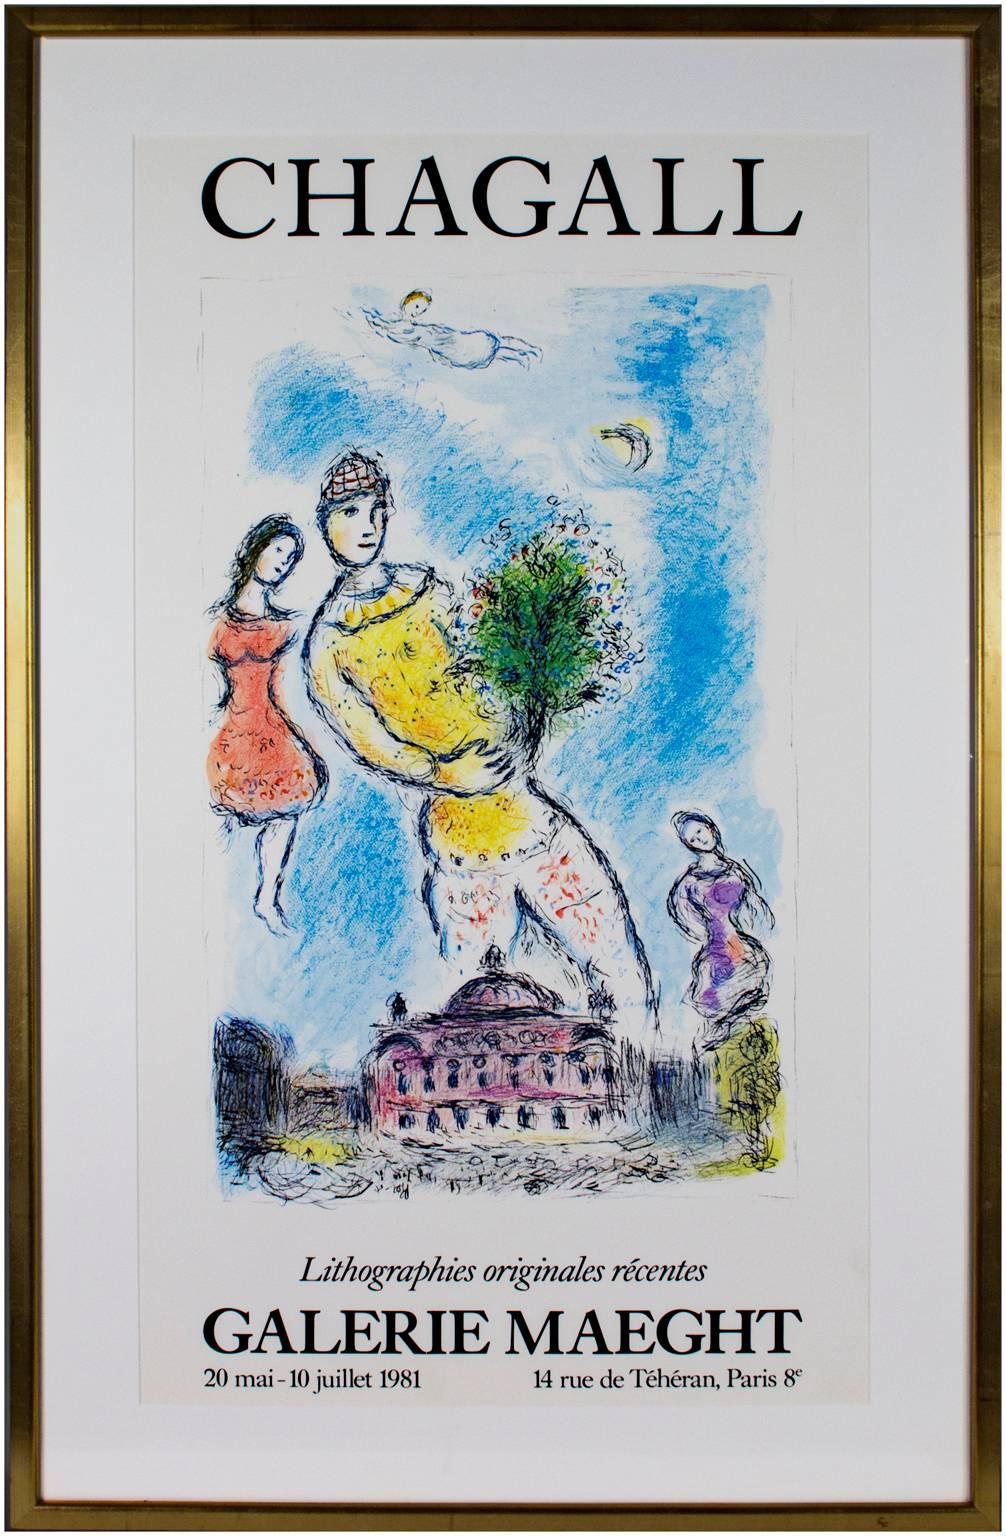 galerie maeght chagall poster